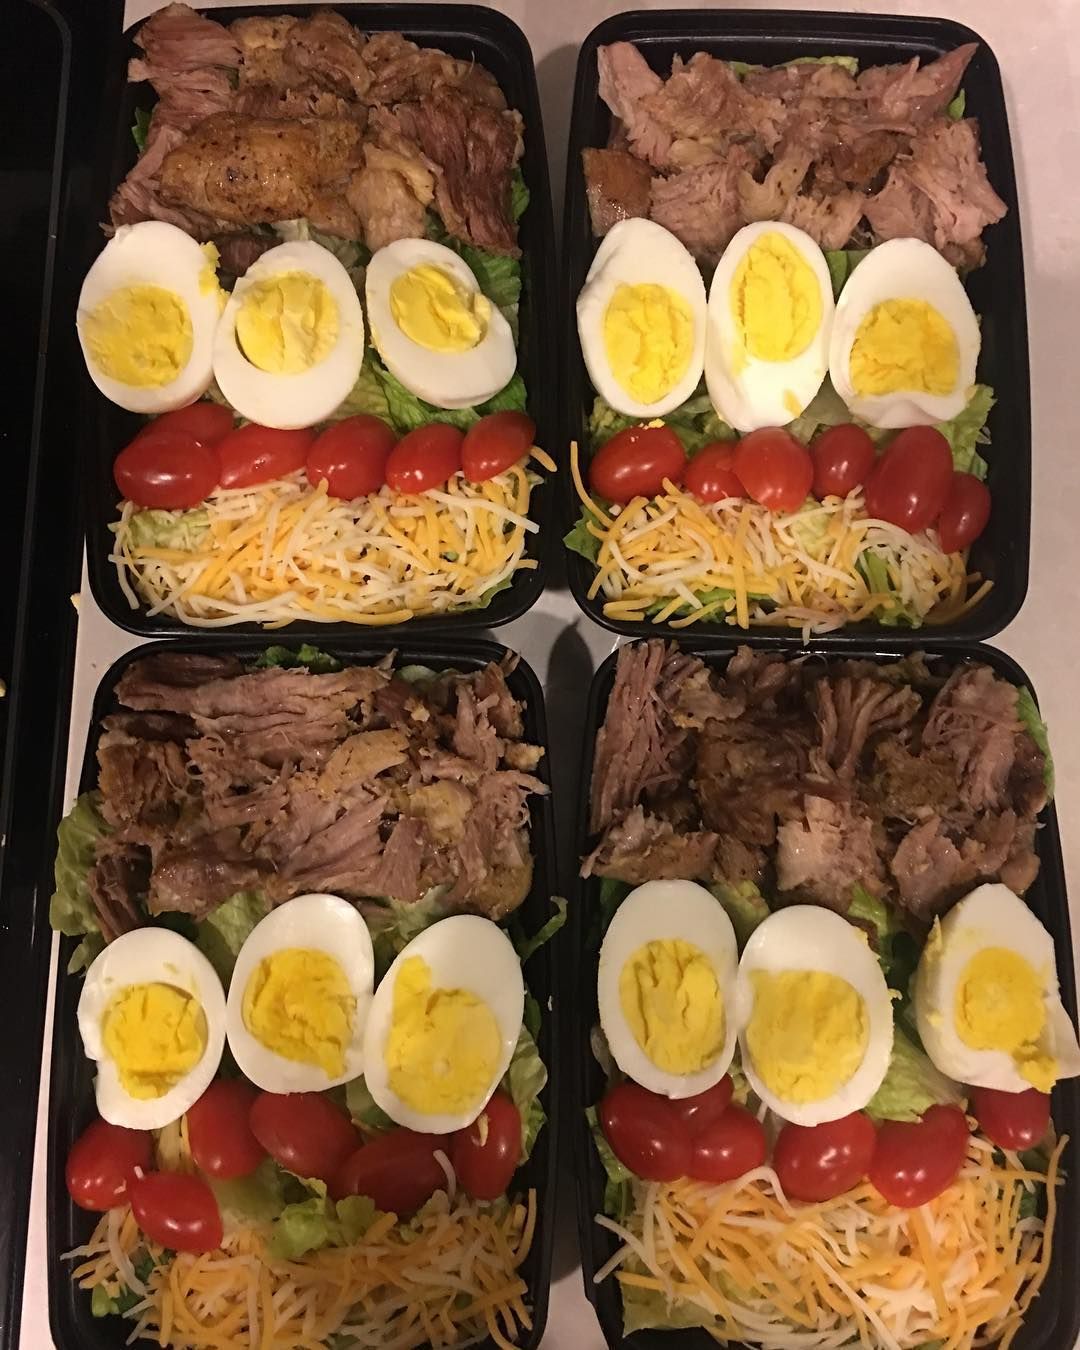 Easy Keto Combinations Even Lazy Dieters Can Meal Prep -   7 fitness Instagram meal prep ideas